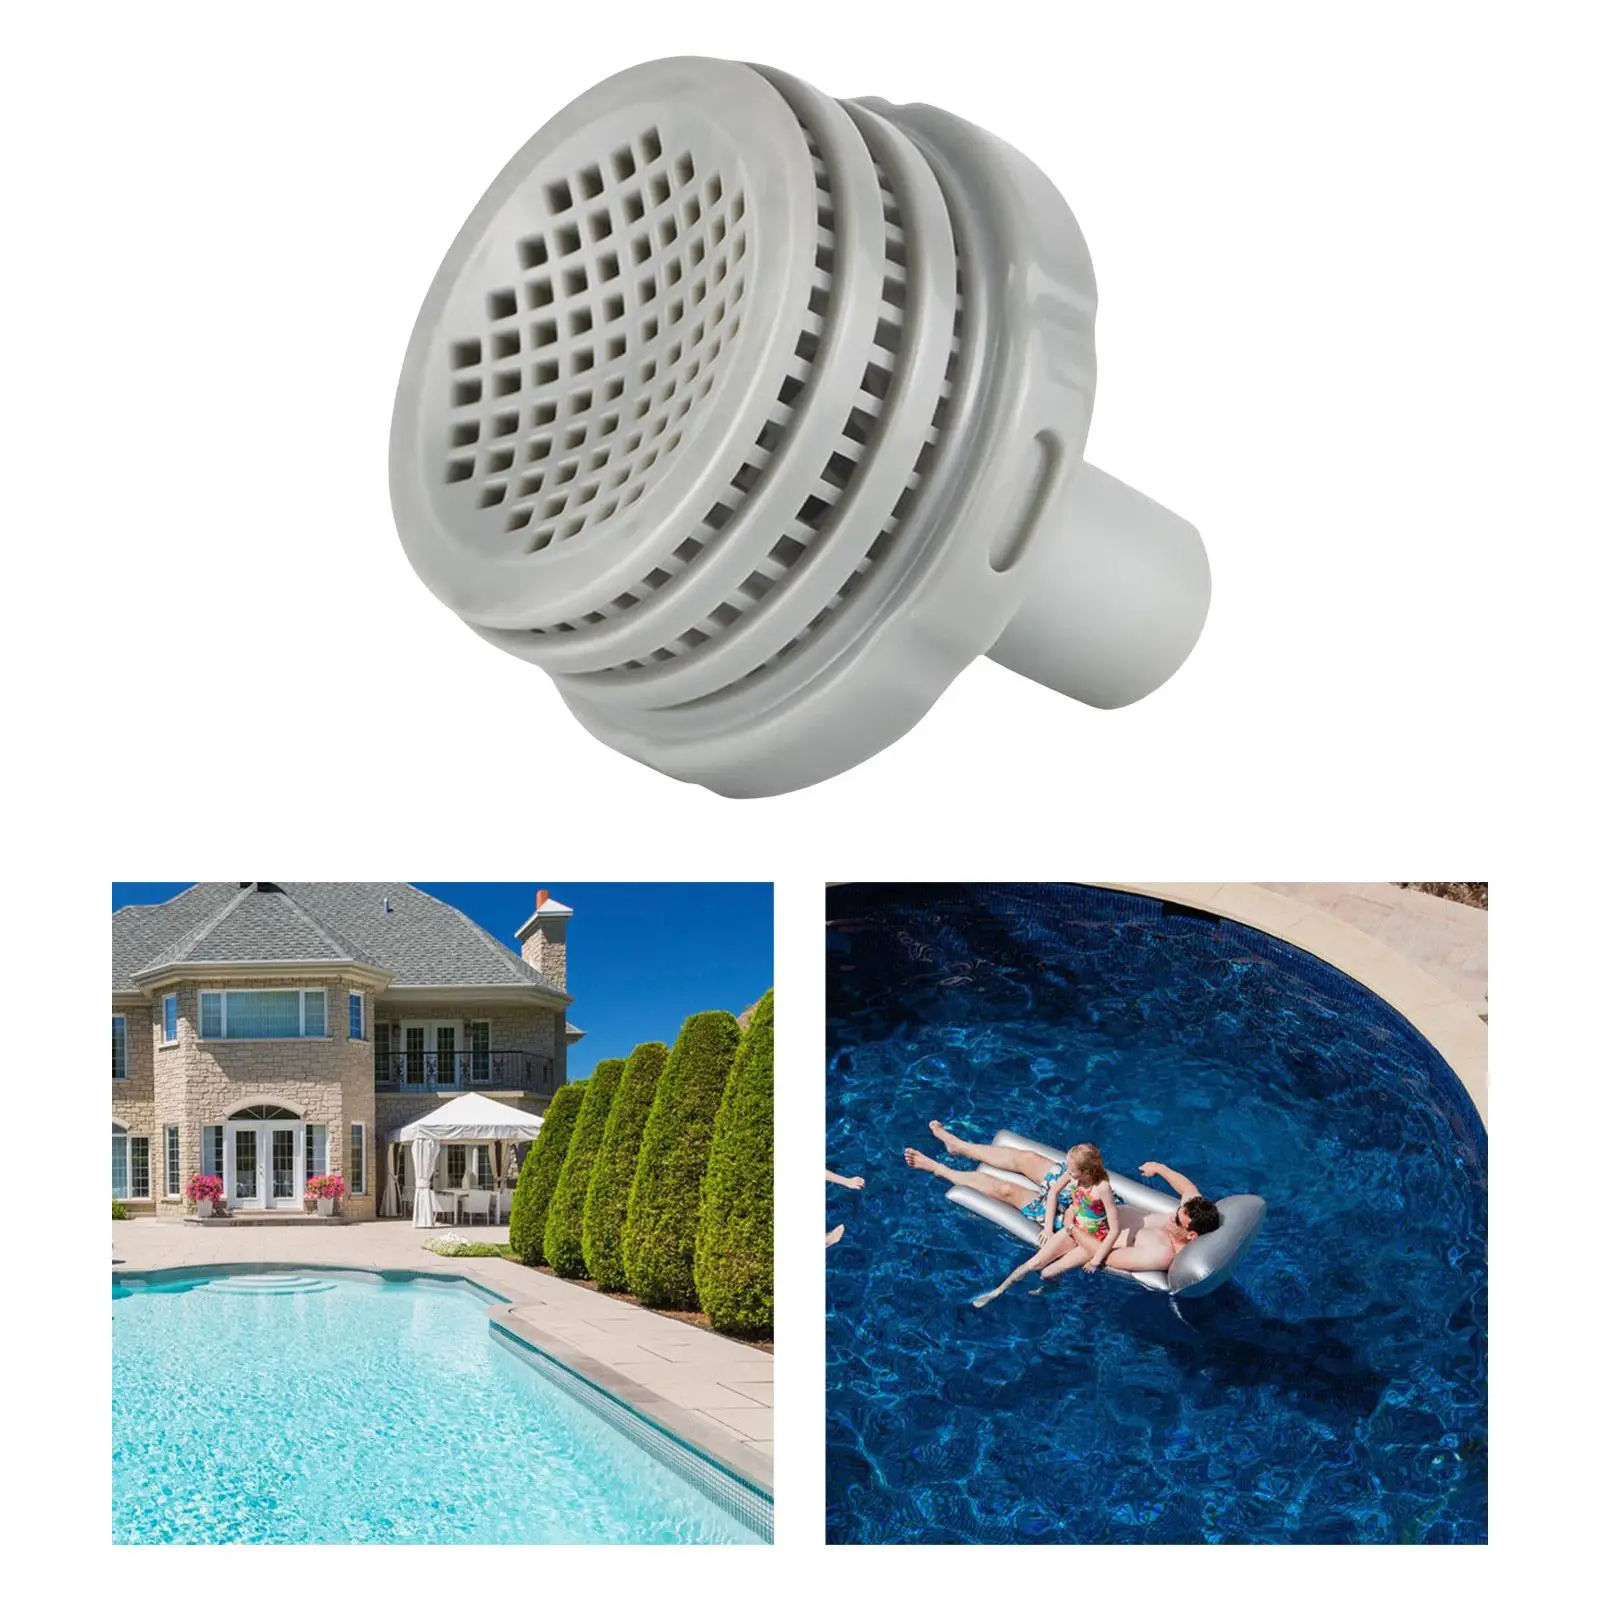 

Water Jet Connectors Summer Swimming Pools Parts Maintenance Pool Drain Adapter Replace Pool Hose Adapter for Swimming Pool Home